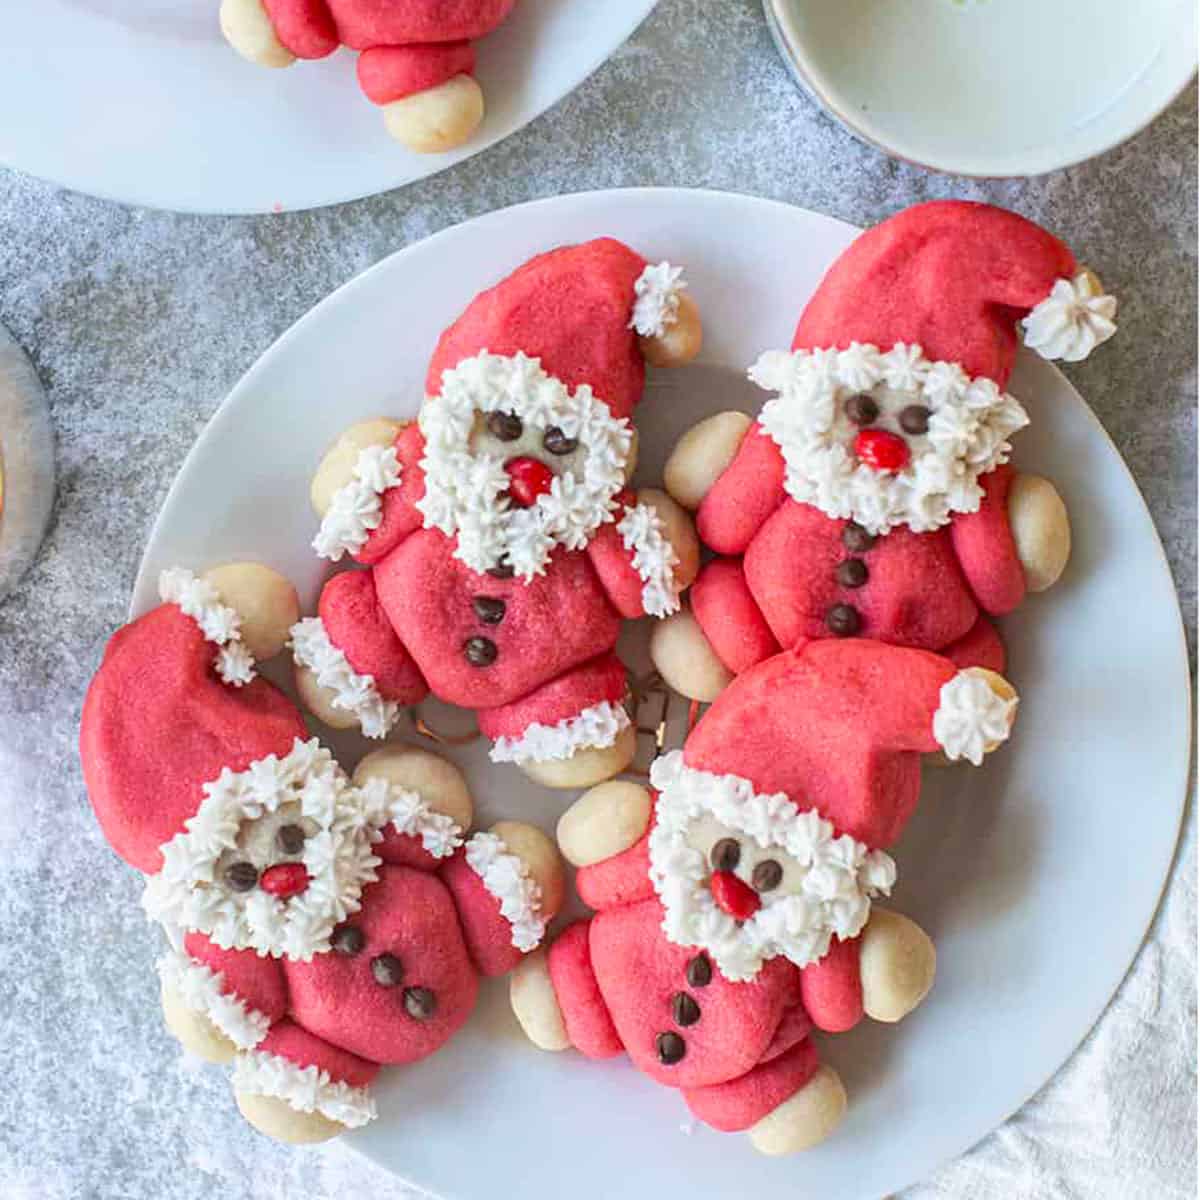 A plate of cookies shaped like Santa Claus.